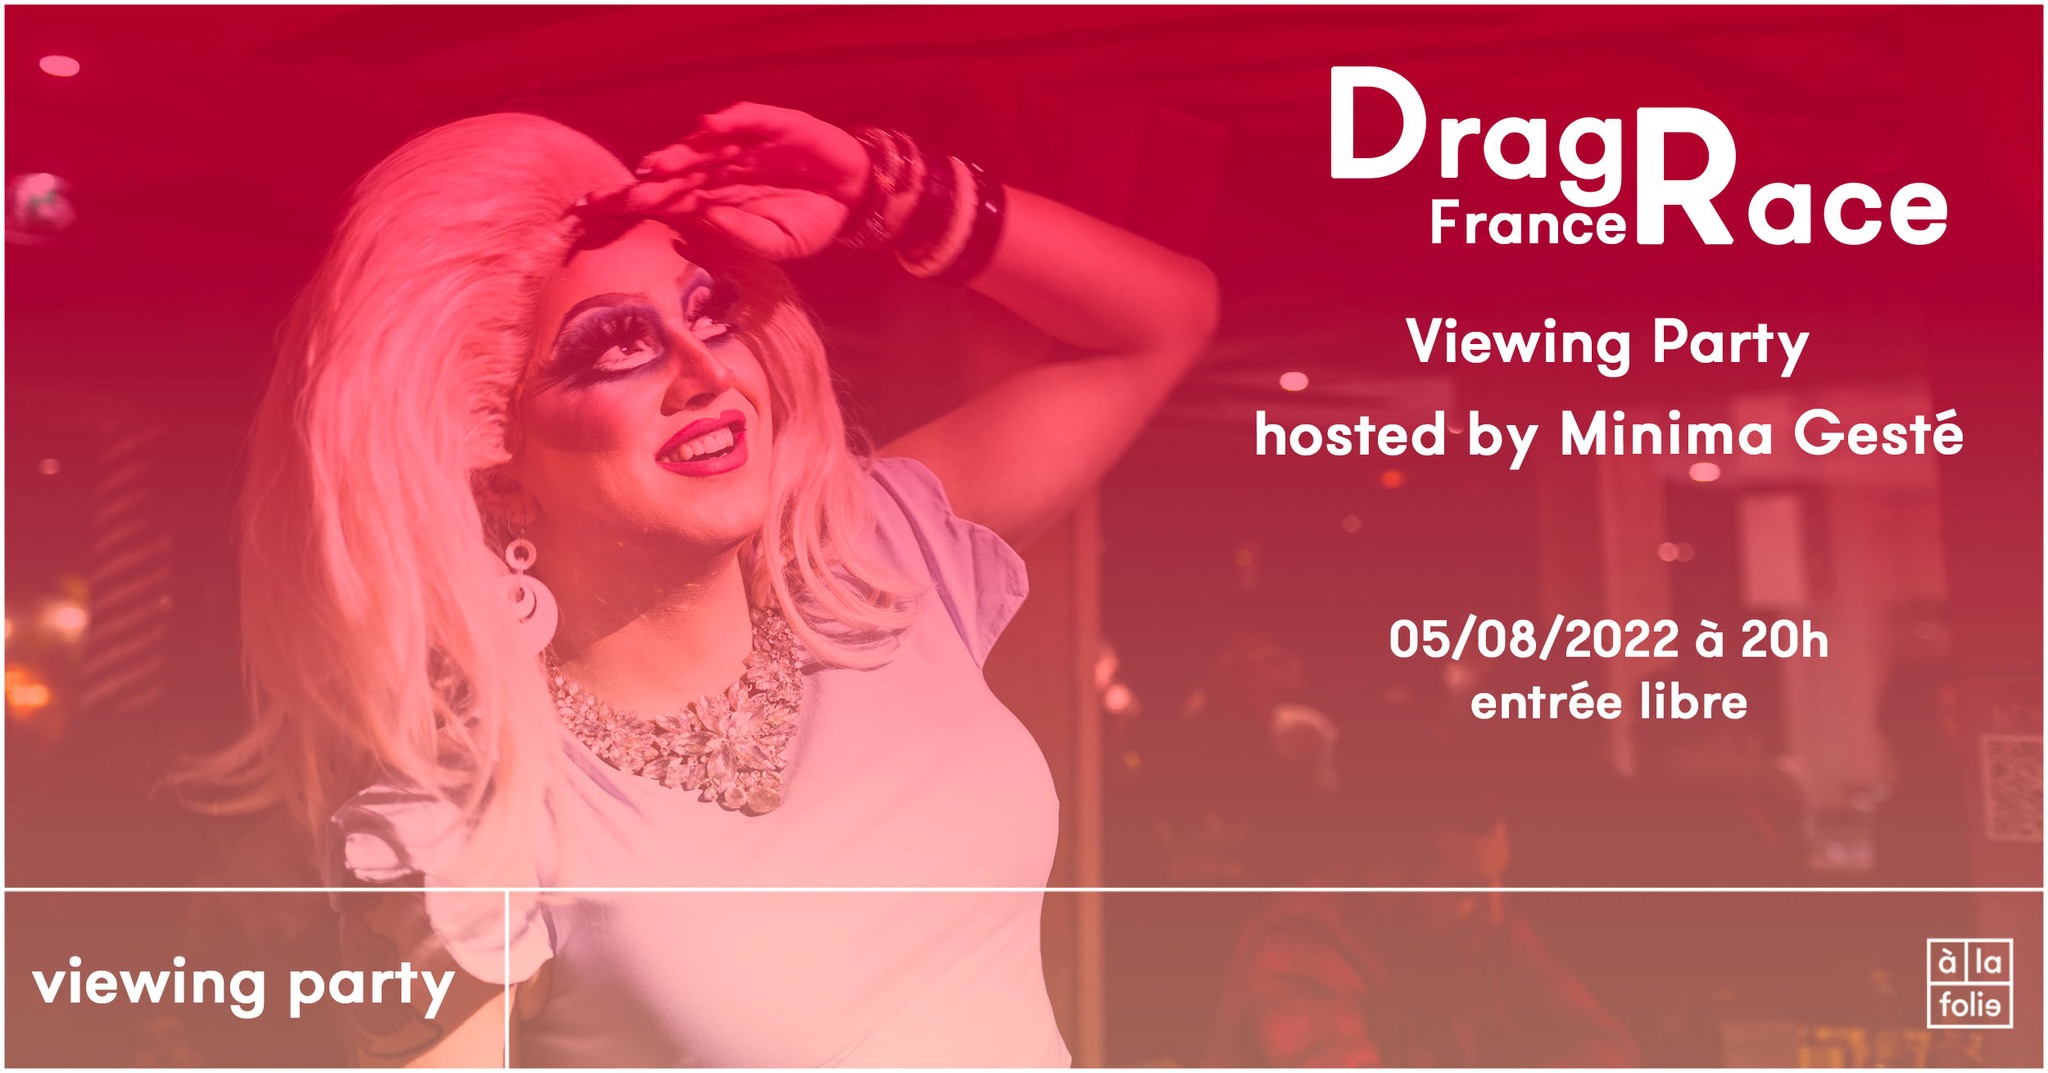 Drag Race Viewing Party hosted by Minima Gesté